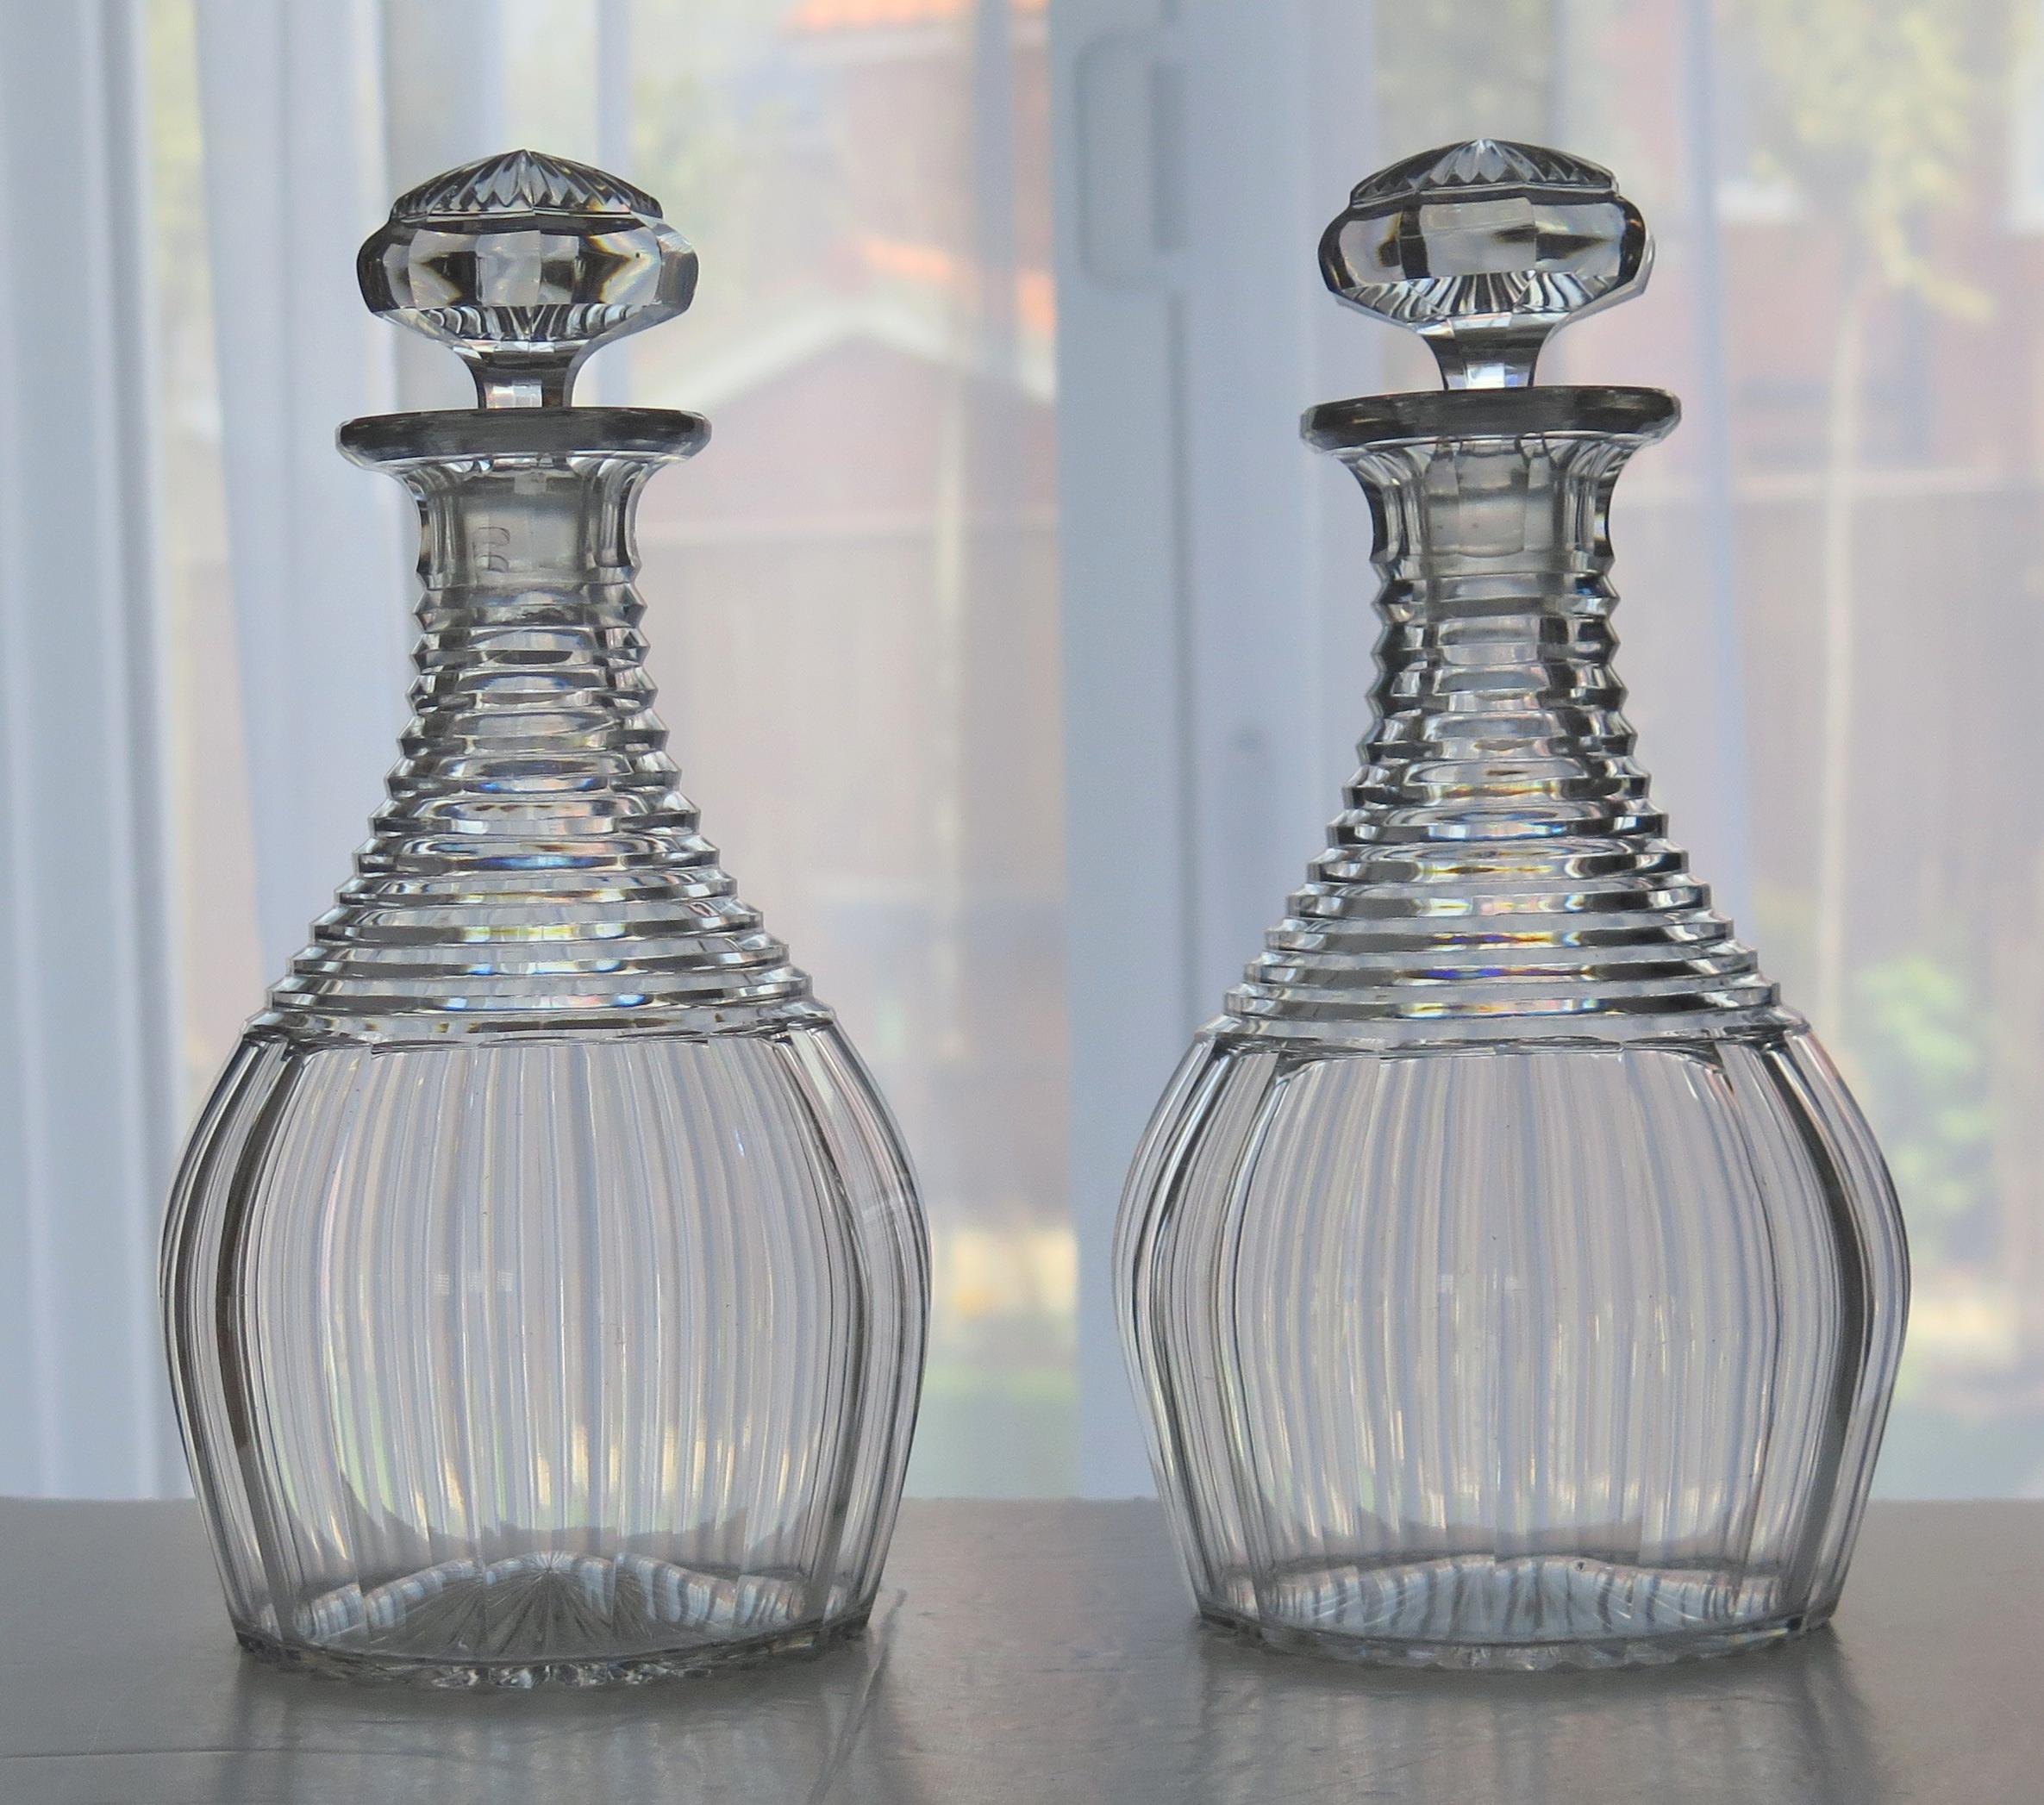 This is a fine and beautiful matching Georgian period PAIR of Irish cut-glass or crystal decanters, dating to the Regency period, Circa 1815.

Both decanters have a 